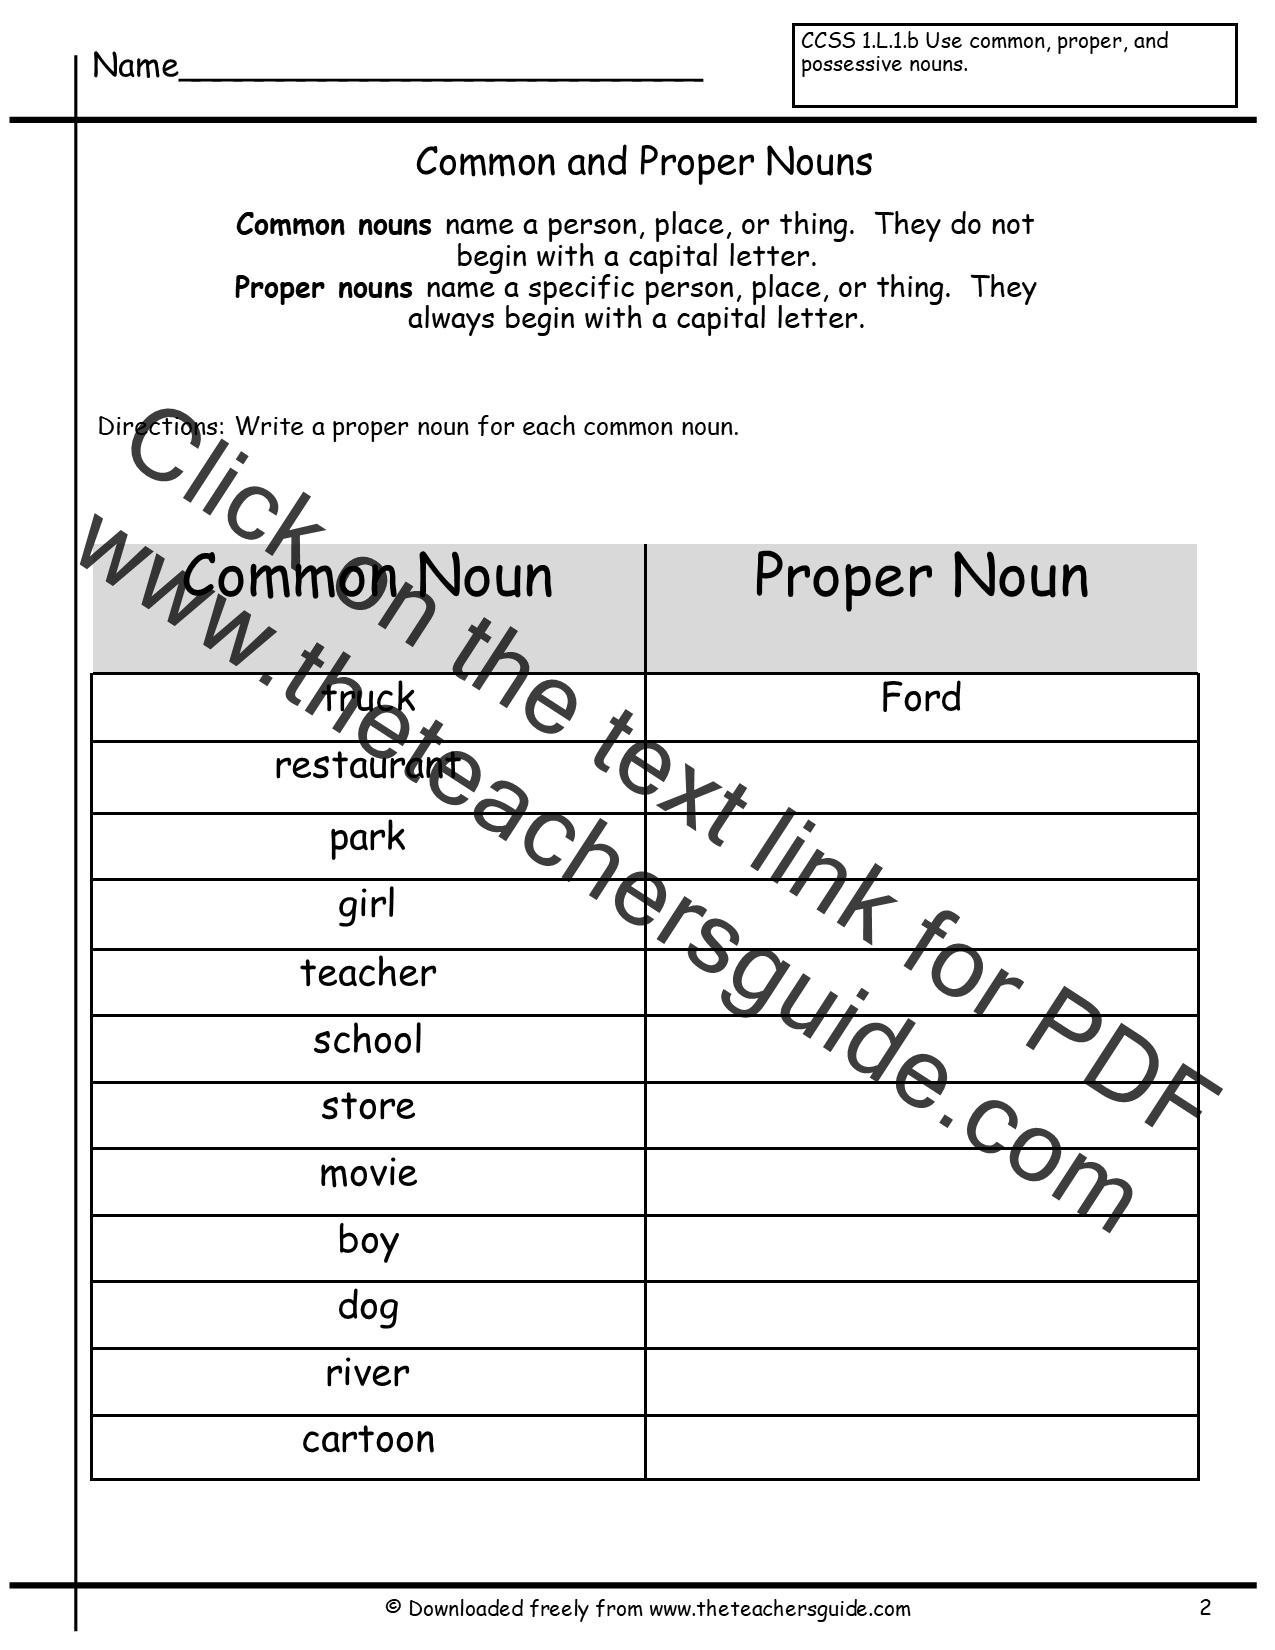 common-and-proper-nouns-worksheets-google-search-common-and-proper-nouns-nouns-worksheet